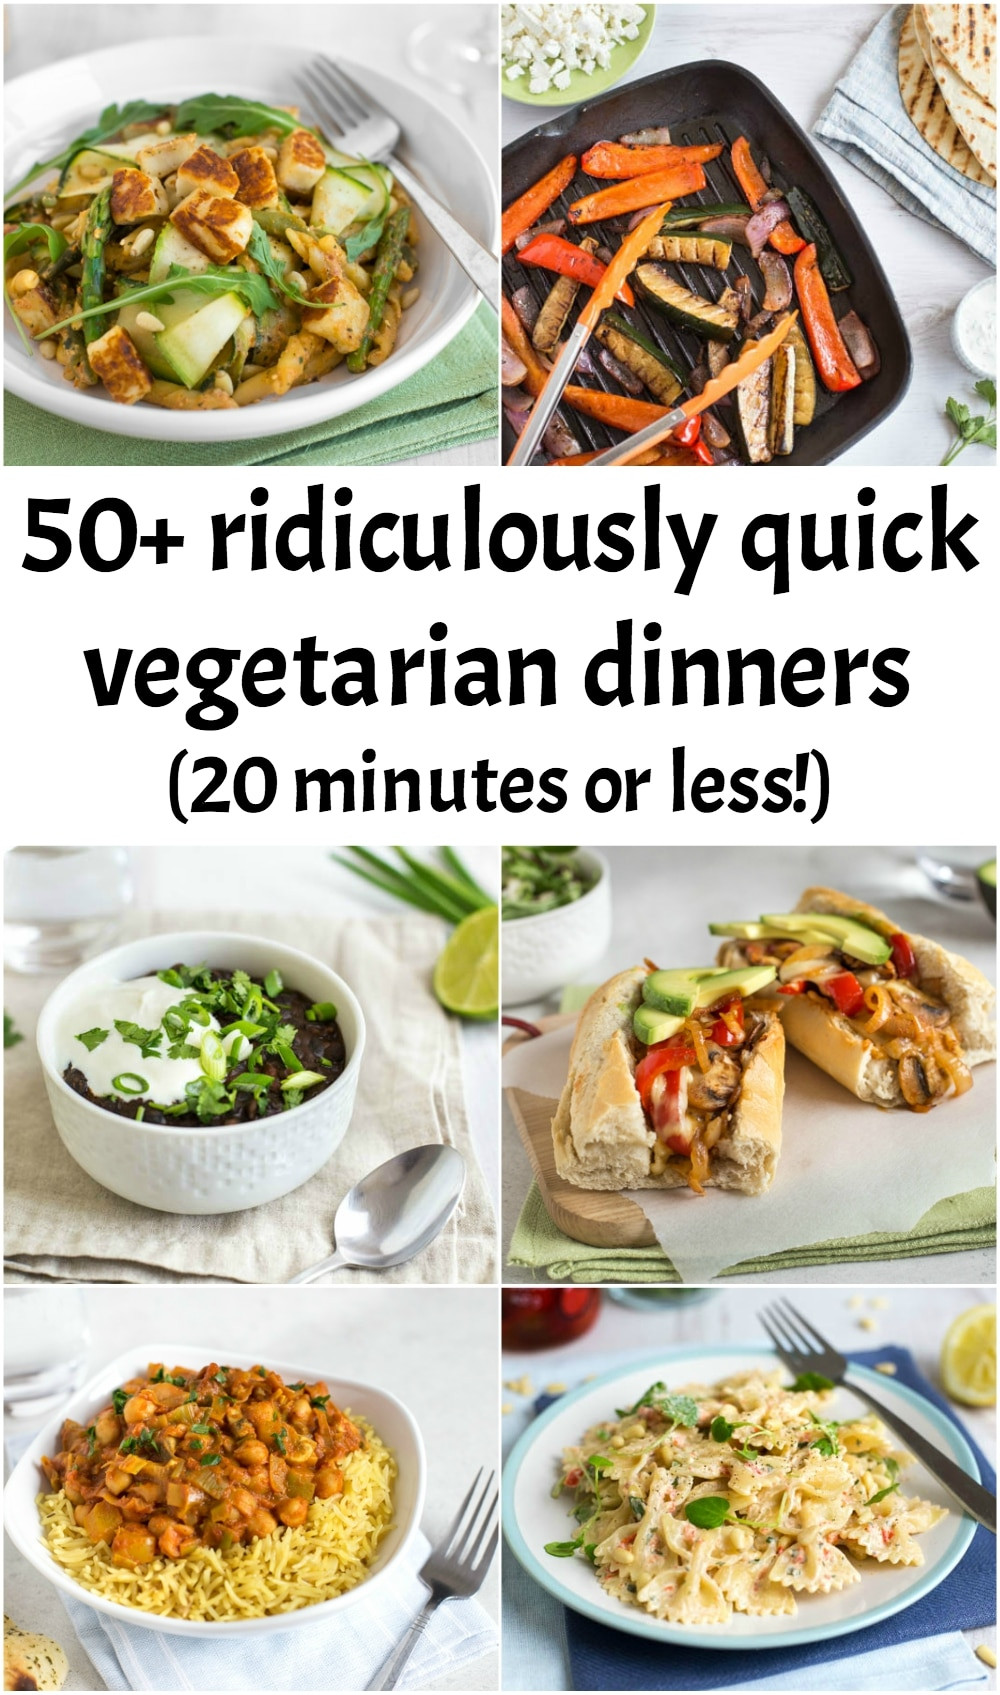 Vegetarian Dinner Ideas
 50 ridiculously quick ve arian dinners 20 minutes or